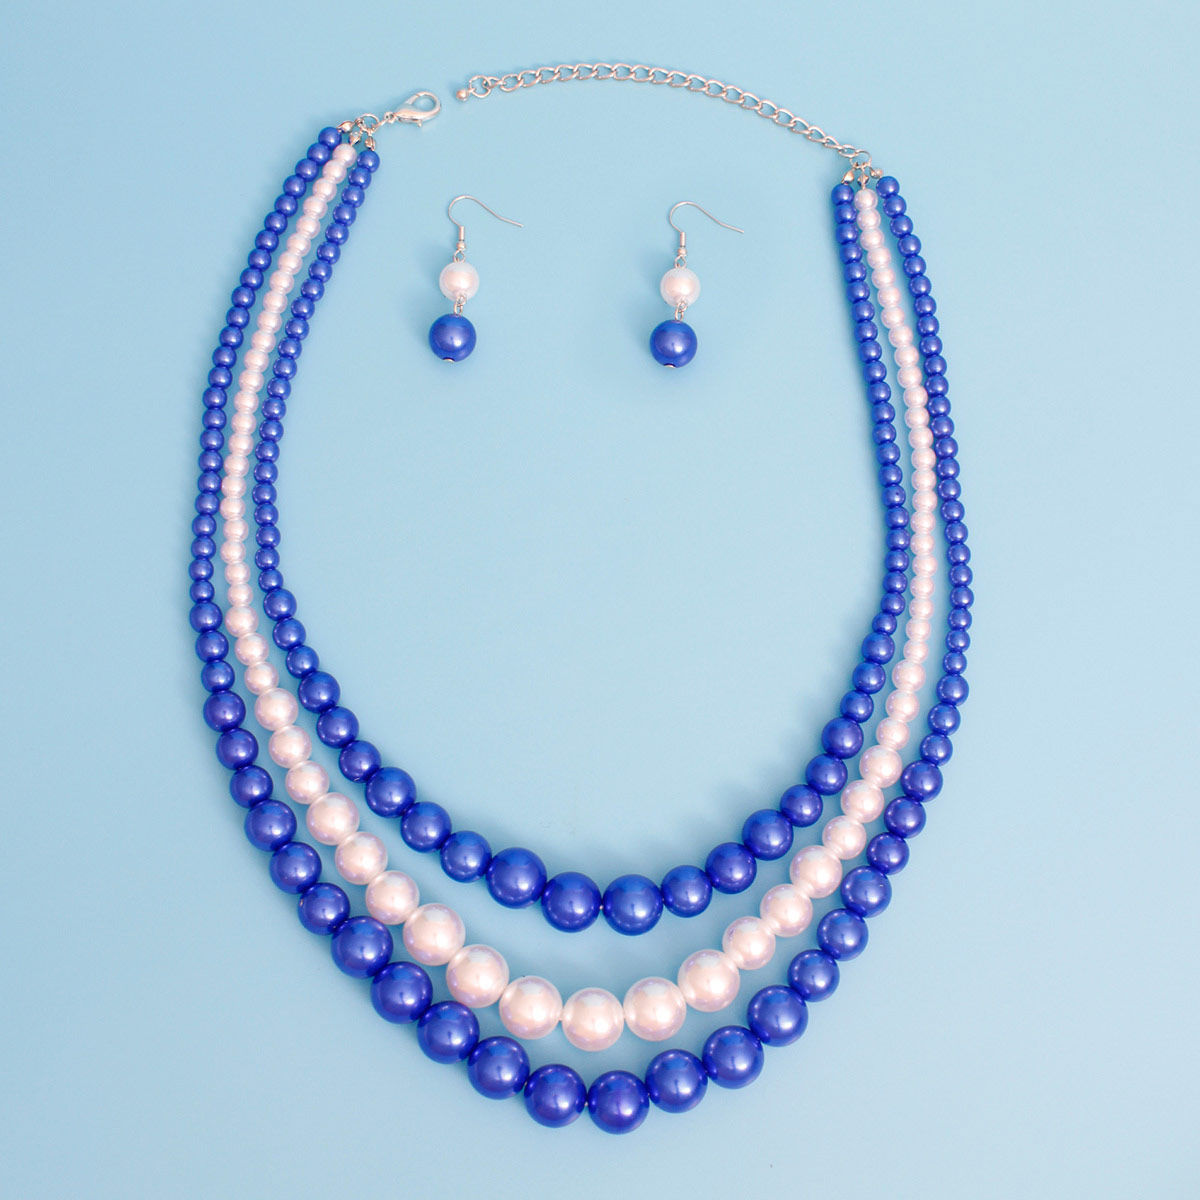 Pearl Necklace Blue White 3 Strand for Women